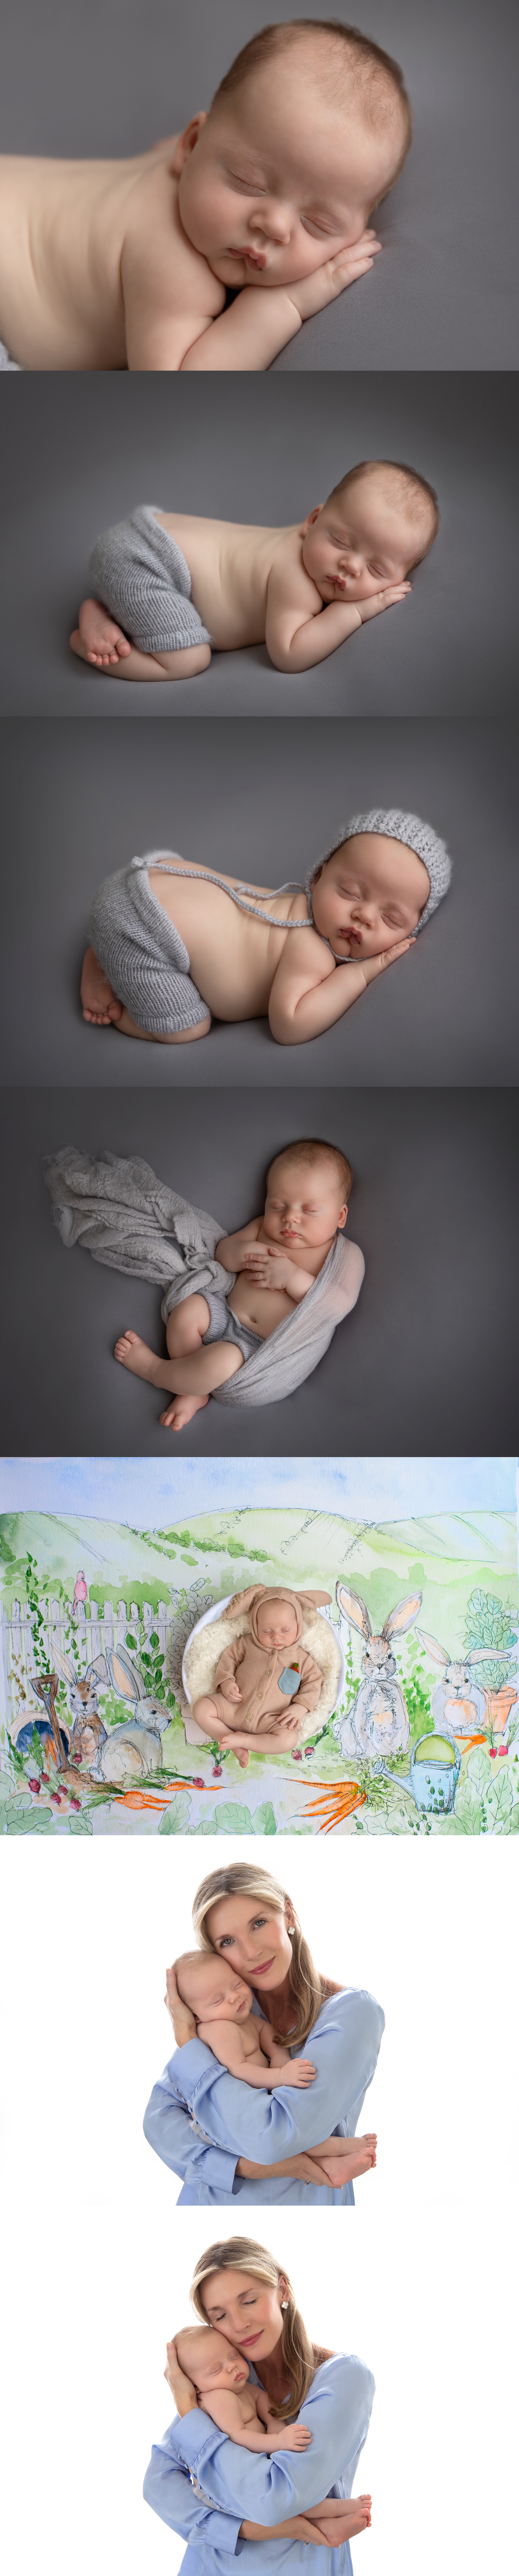 baby studio photography session at 2 month of age with soft gray props